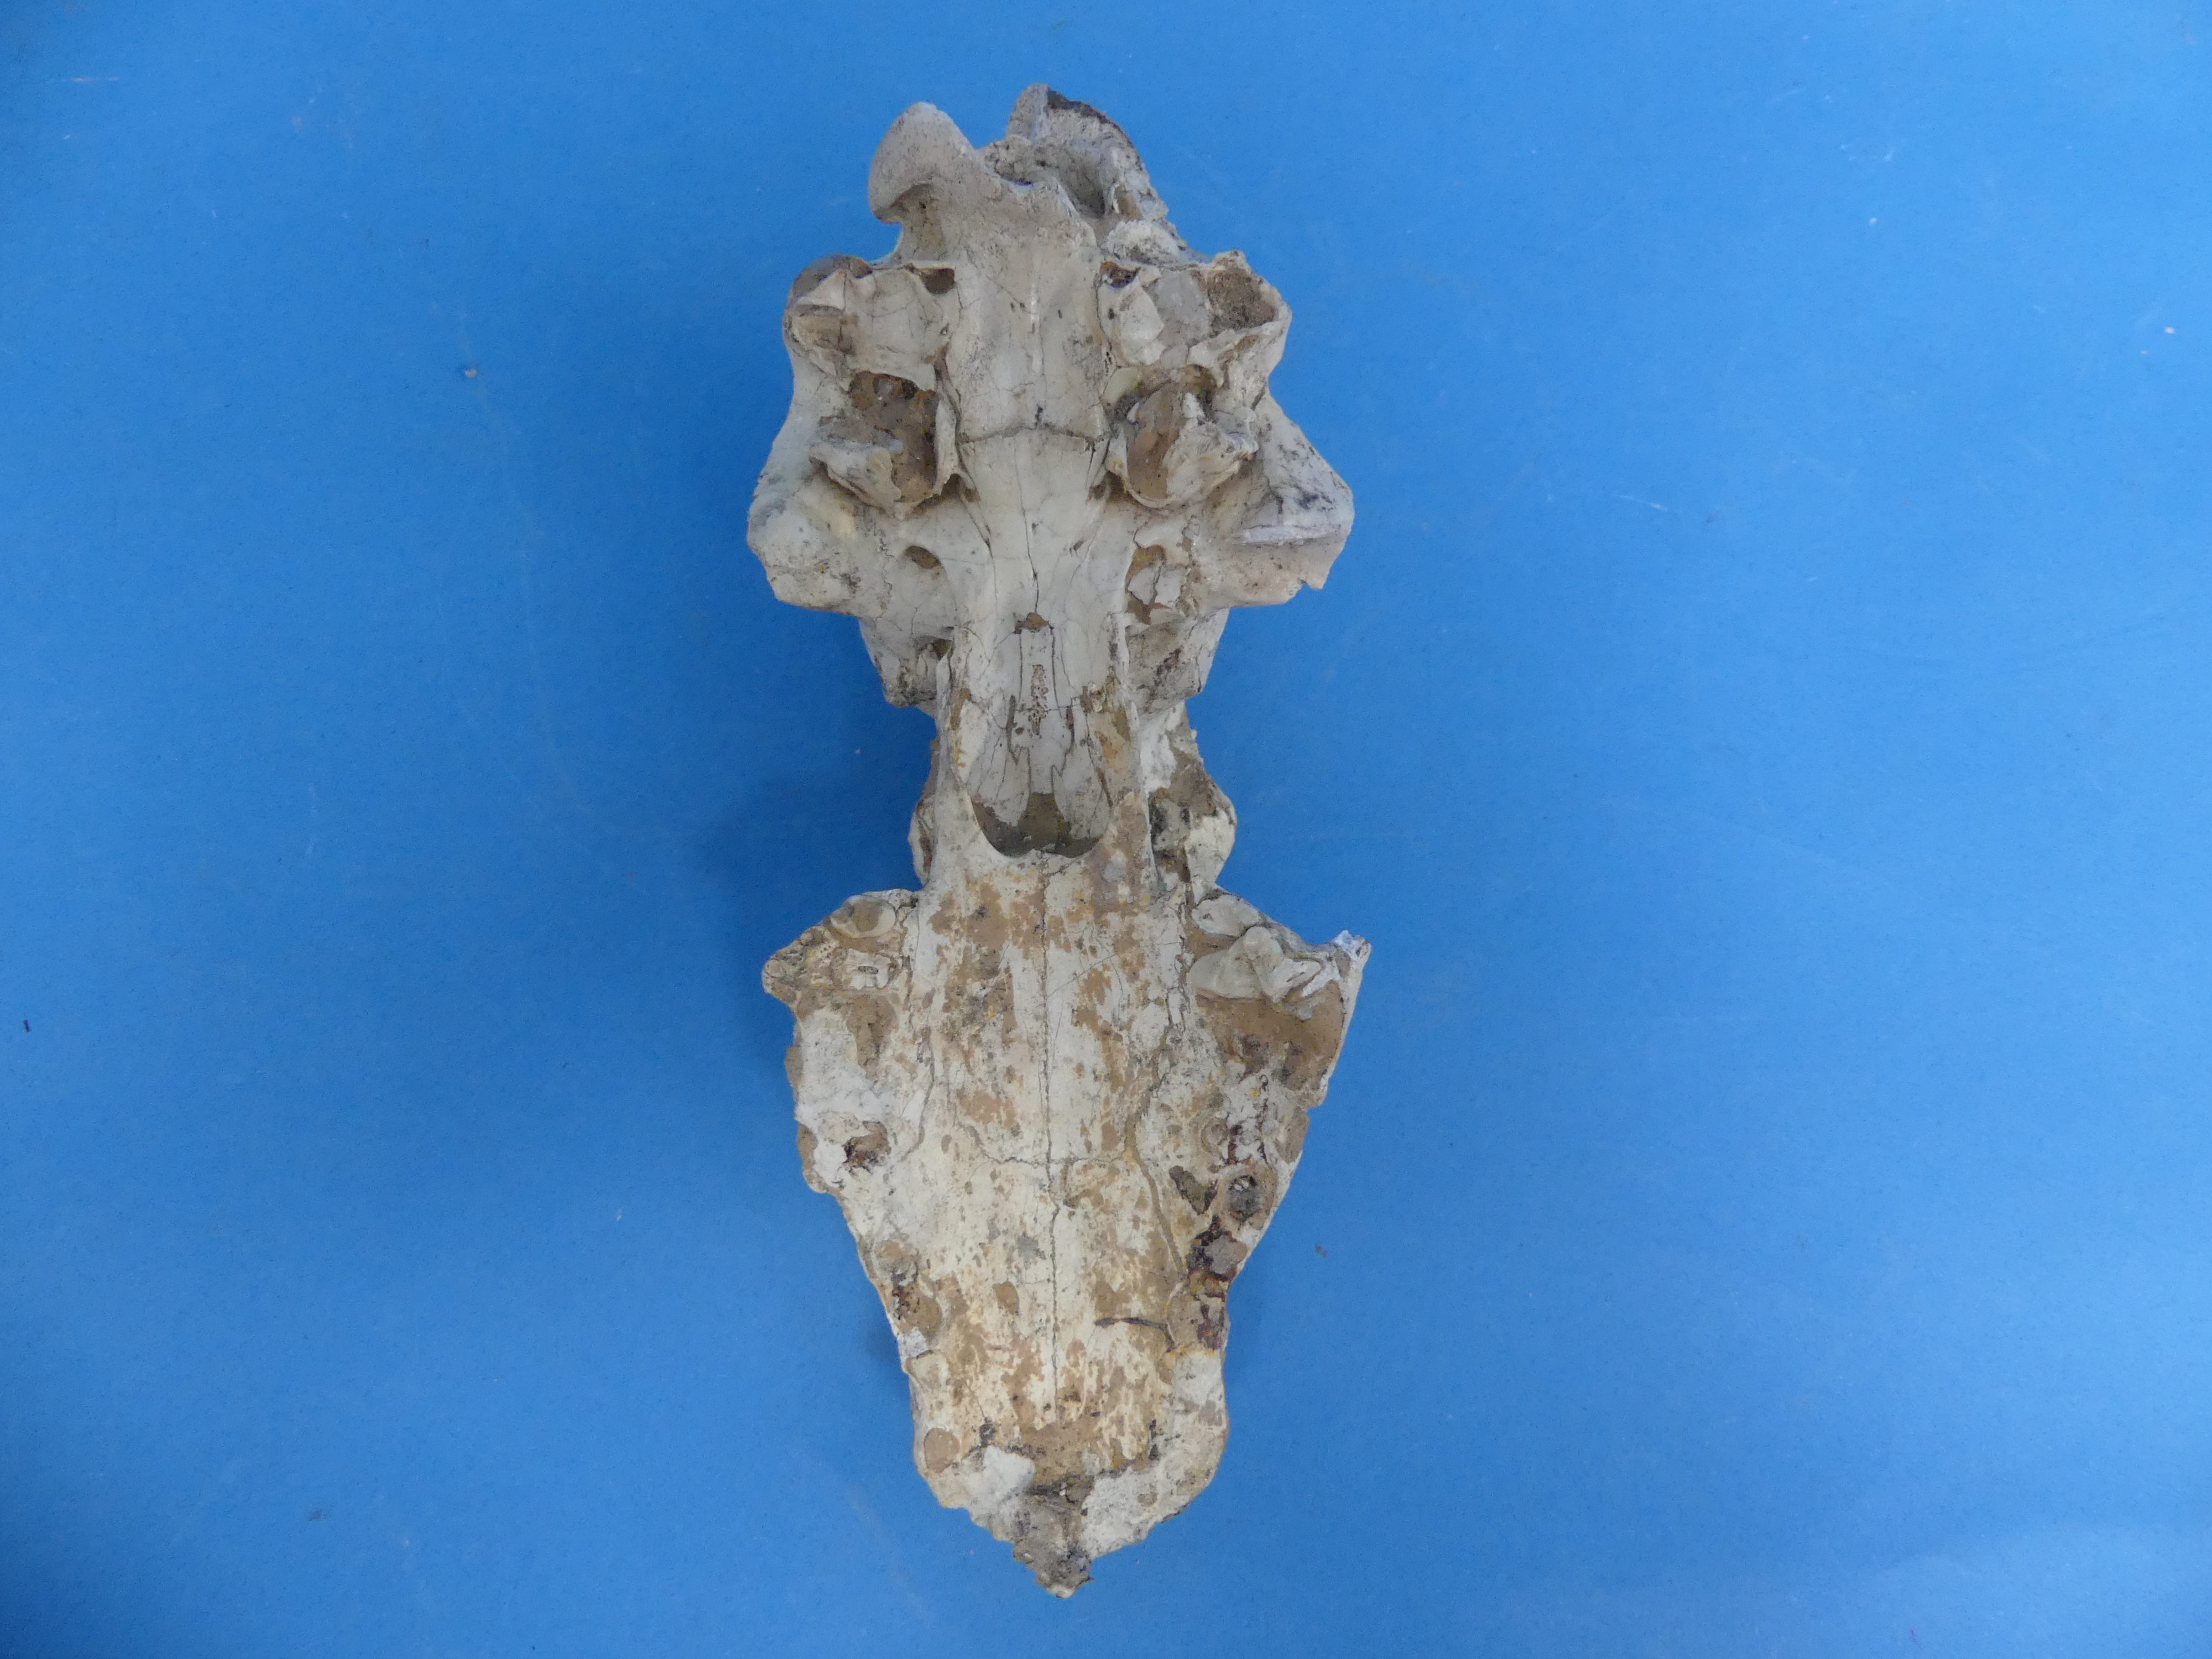 Natural History, Paleontology and Minerals; An Early Wolf (CANIS FALCONERI) Skull, Early Pleistocene - Image 11 of 12